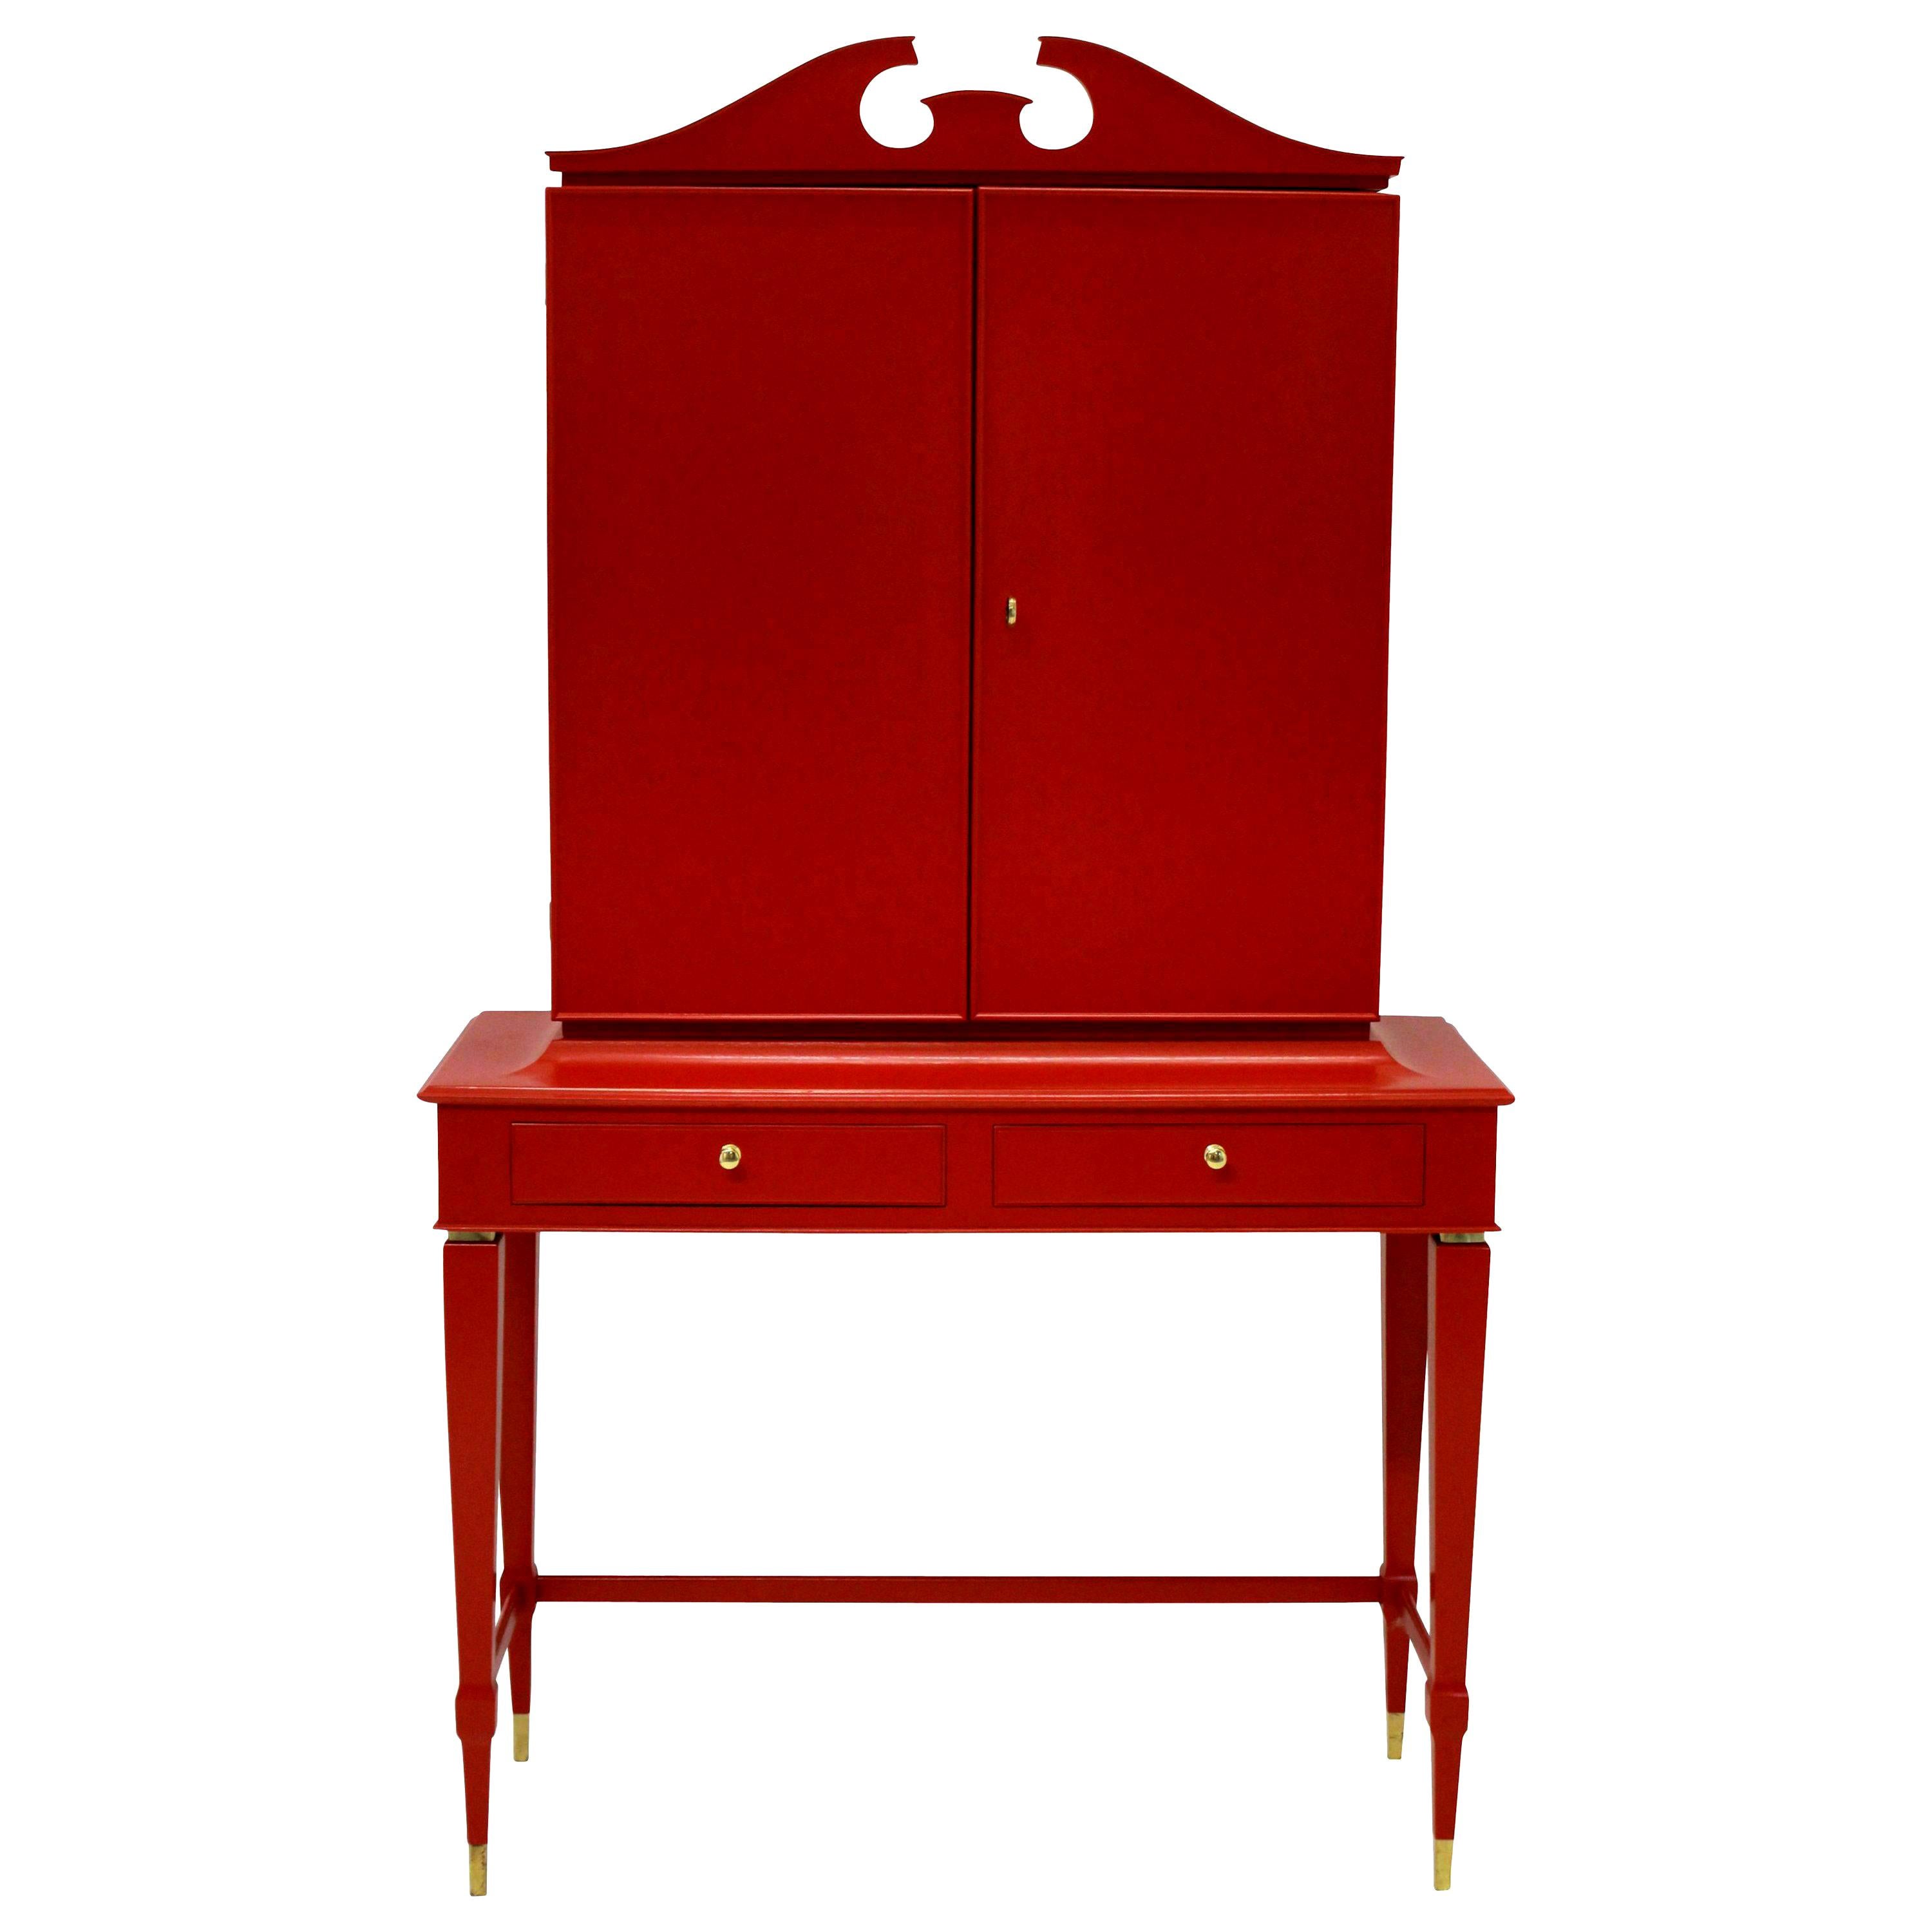 Stunning Architectural Bar Cabinet in Scarlet Lacquer by Paolo Buffa